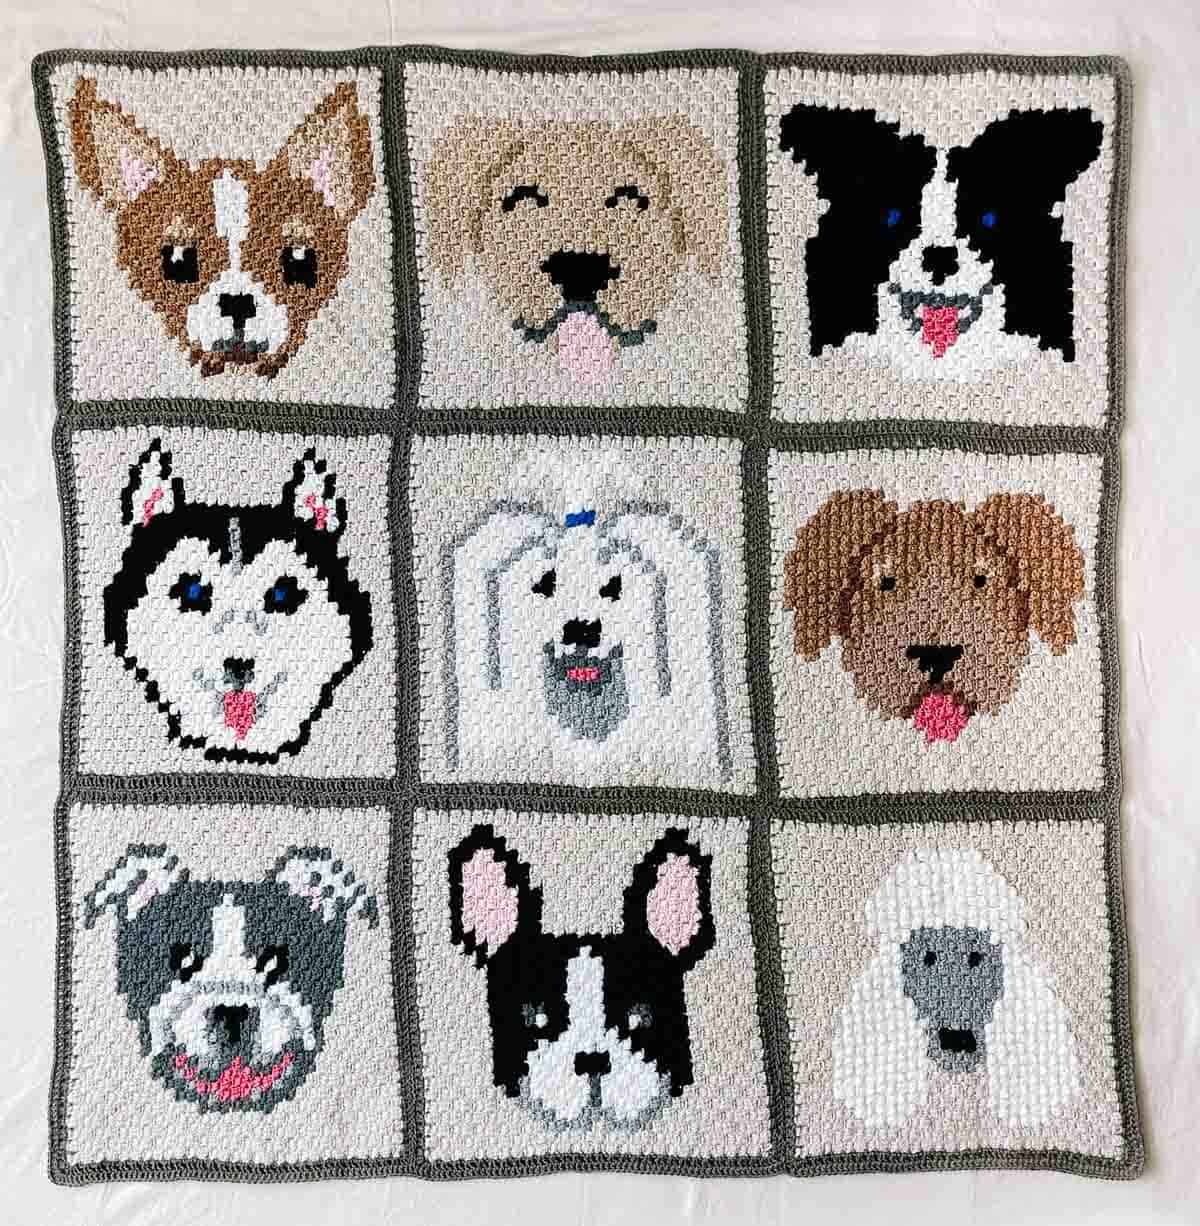 This image shows a free crochet pattern for a c2c crochet dog breed blanket.